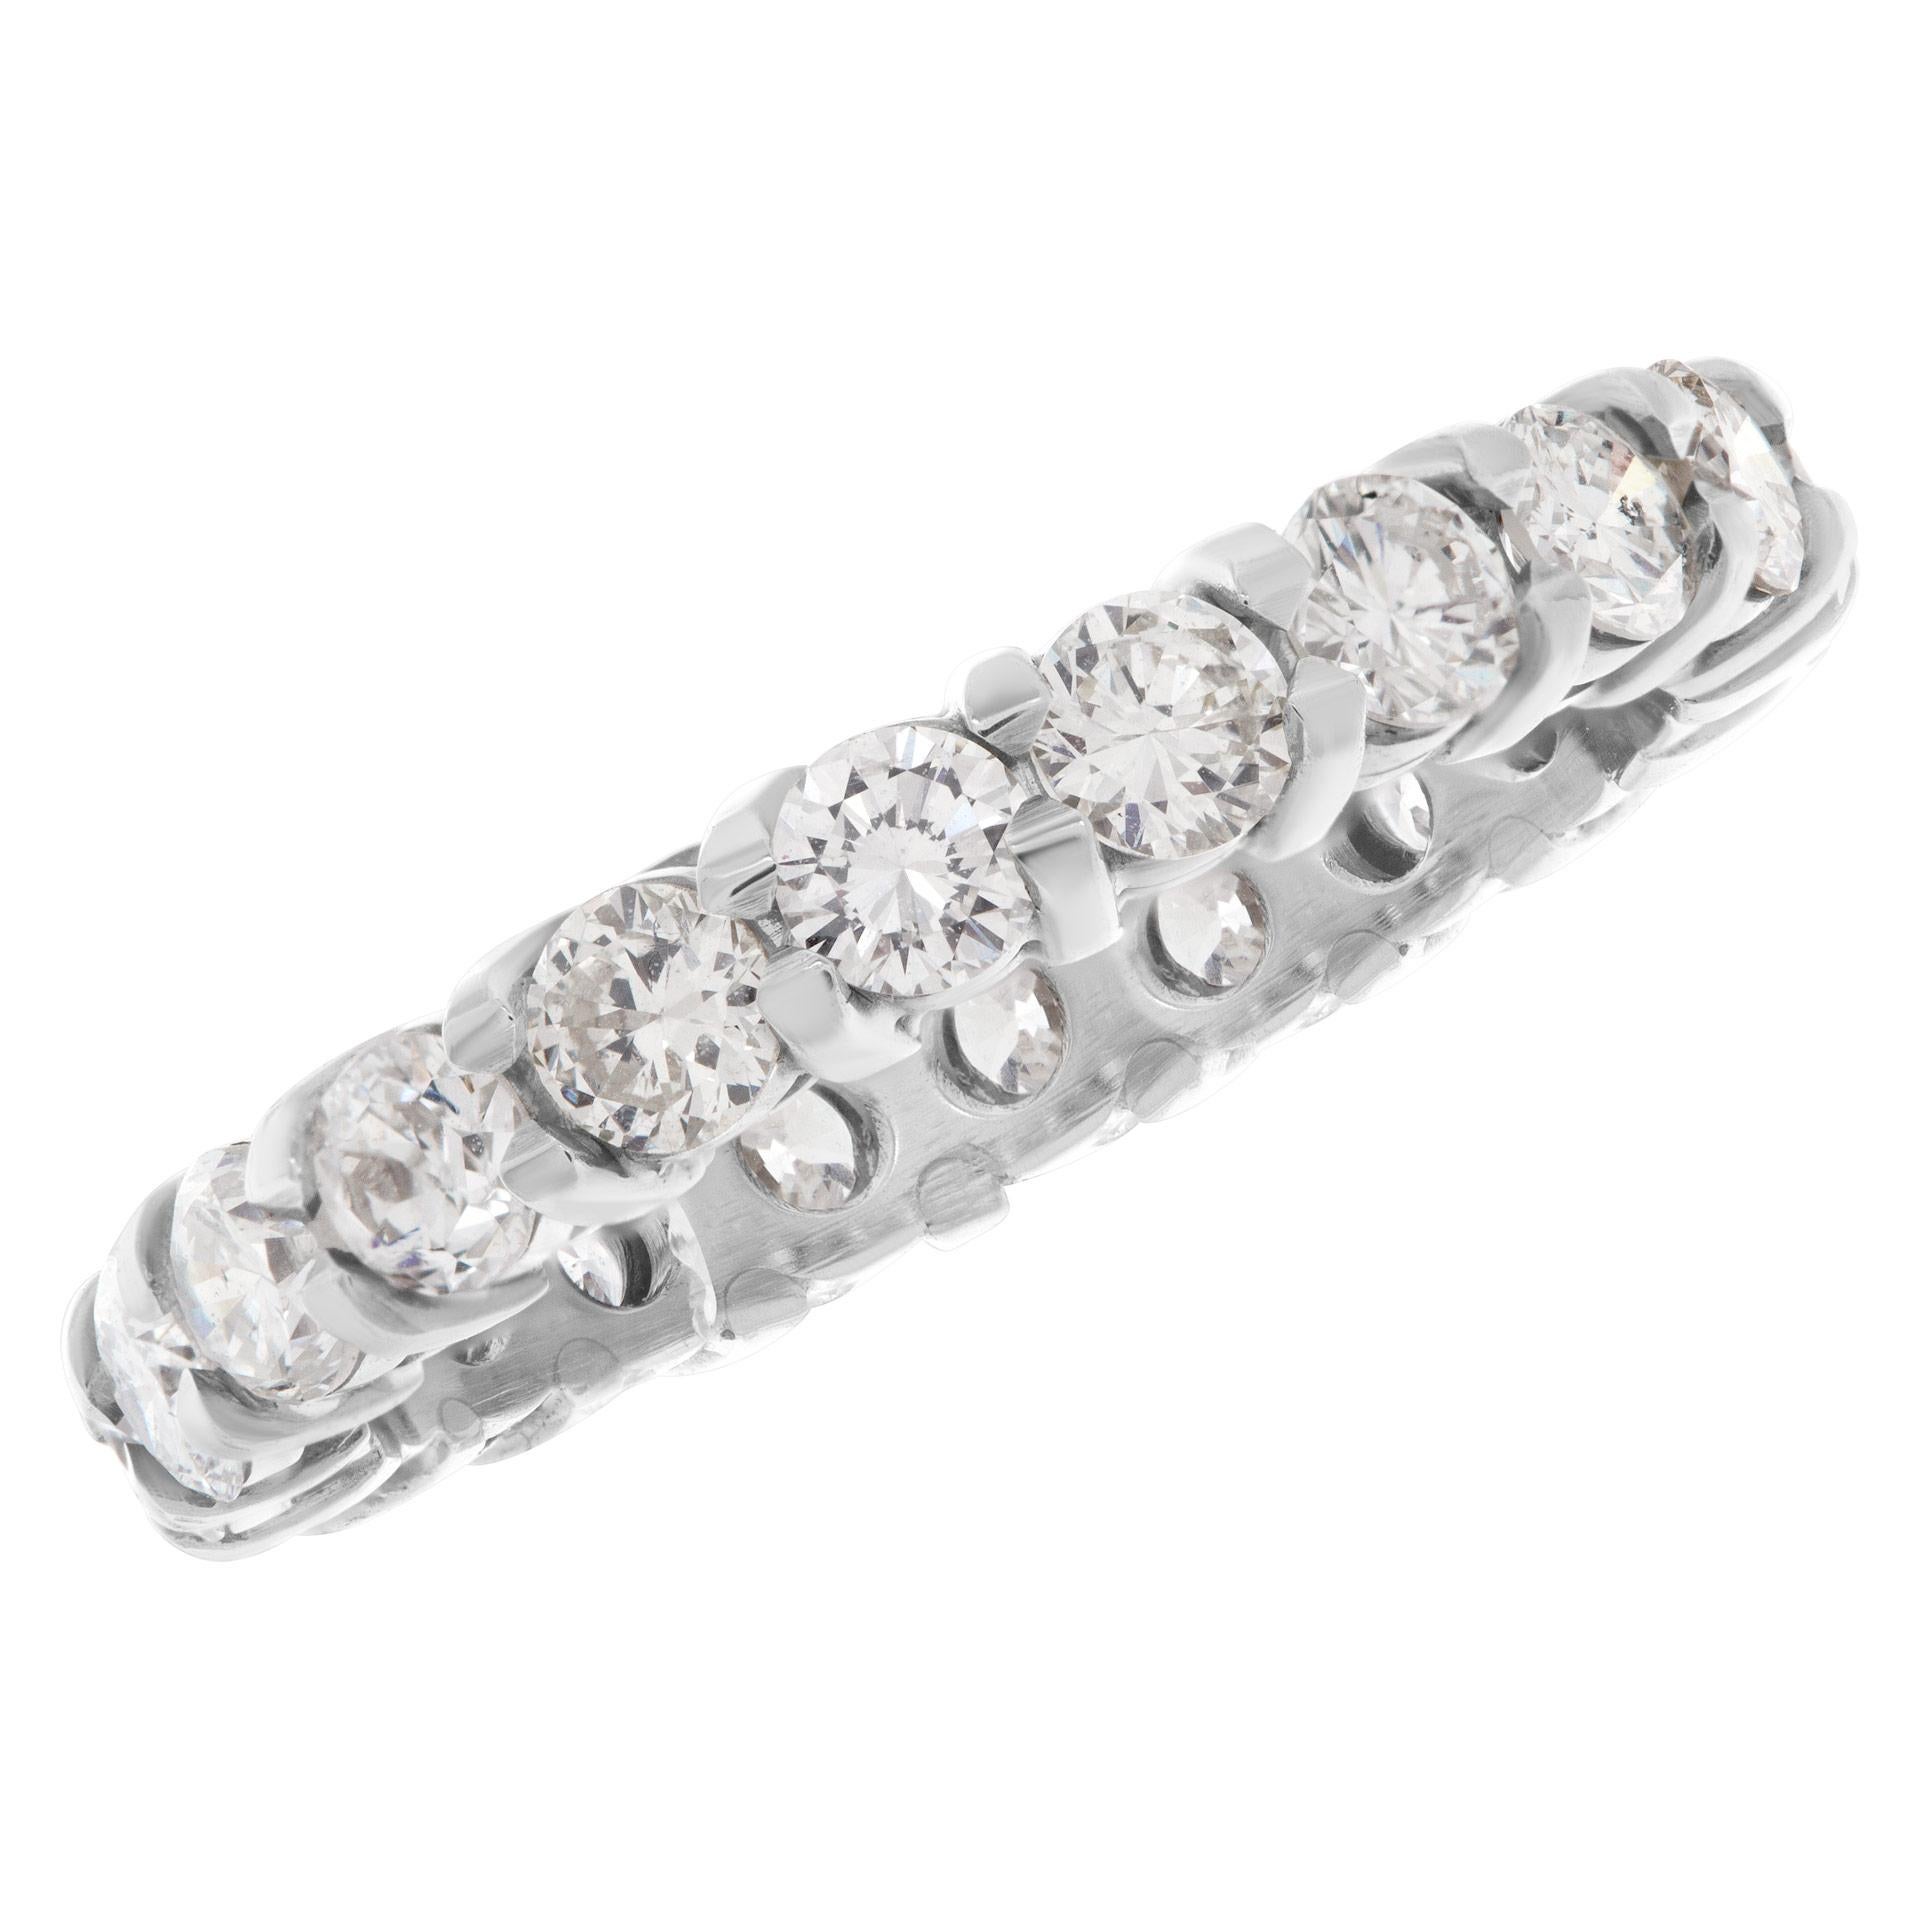 Diamond Eternity Band and Ring with 1.95 Carats in Diamonds Set in Platinum In Excellent Condition For Sale In Surfside, FL